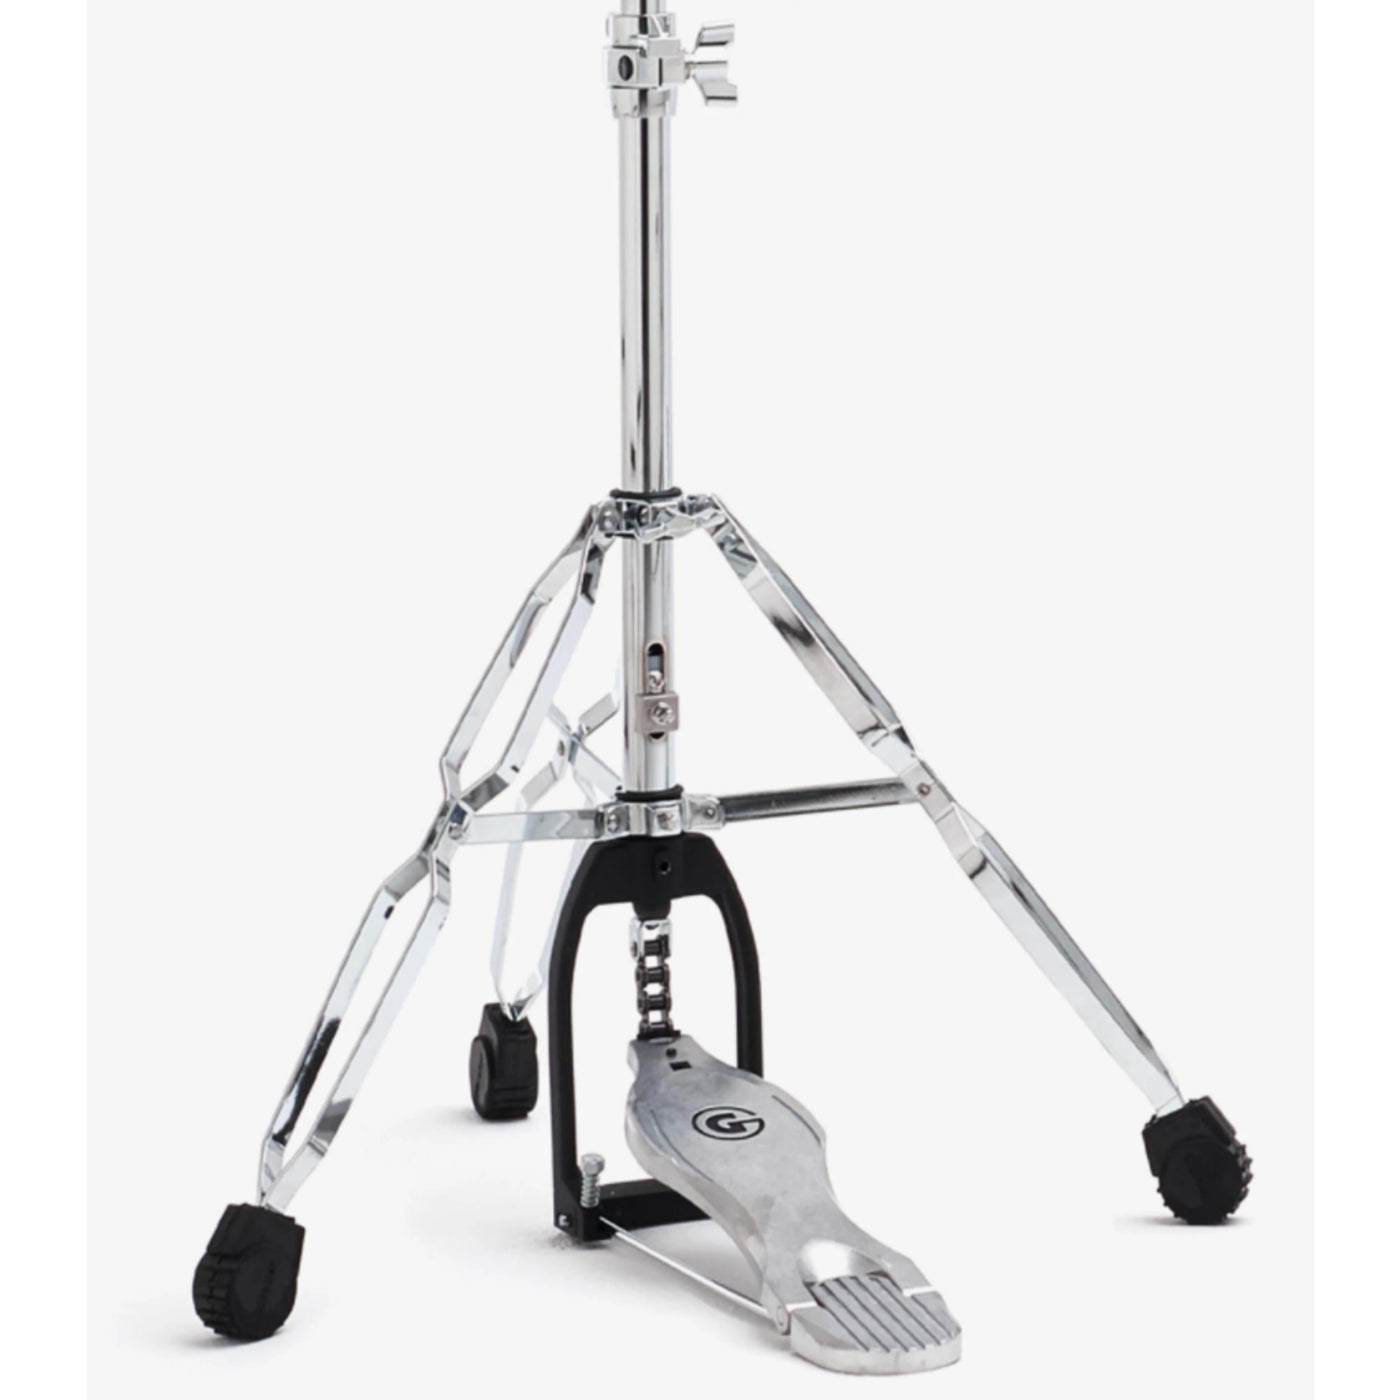 Gibraltar 5000 Series Drum Hardware Pack with Drum and Cymbal Stands (5700PK)